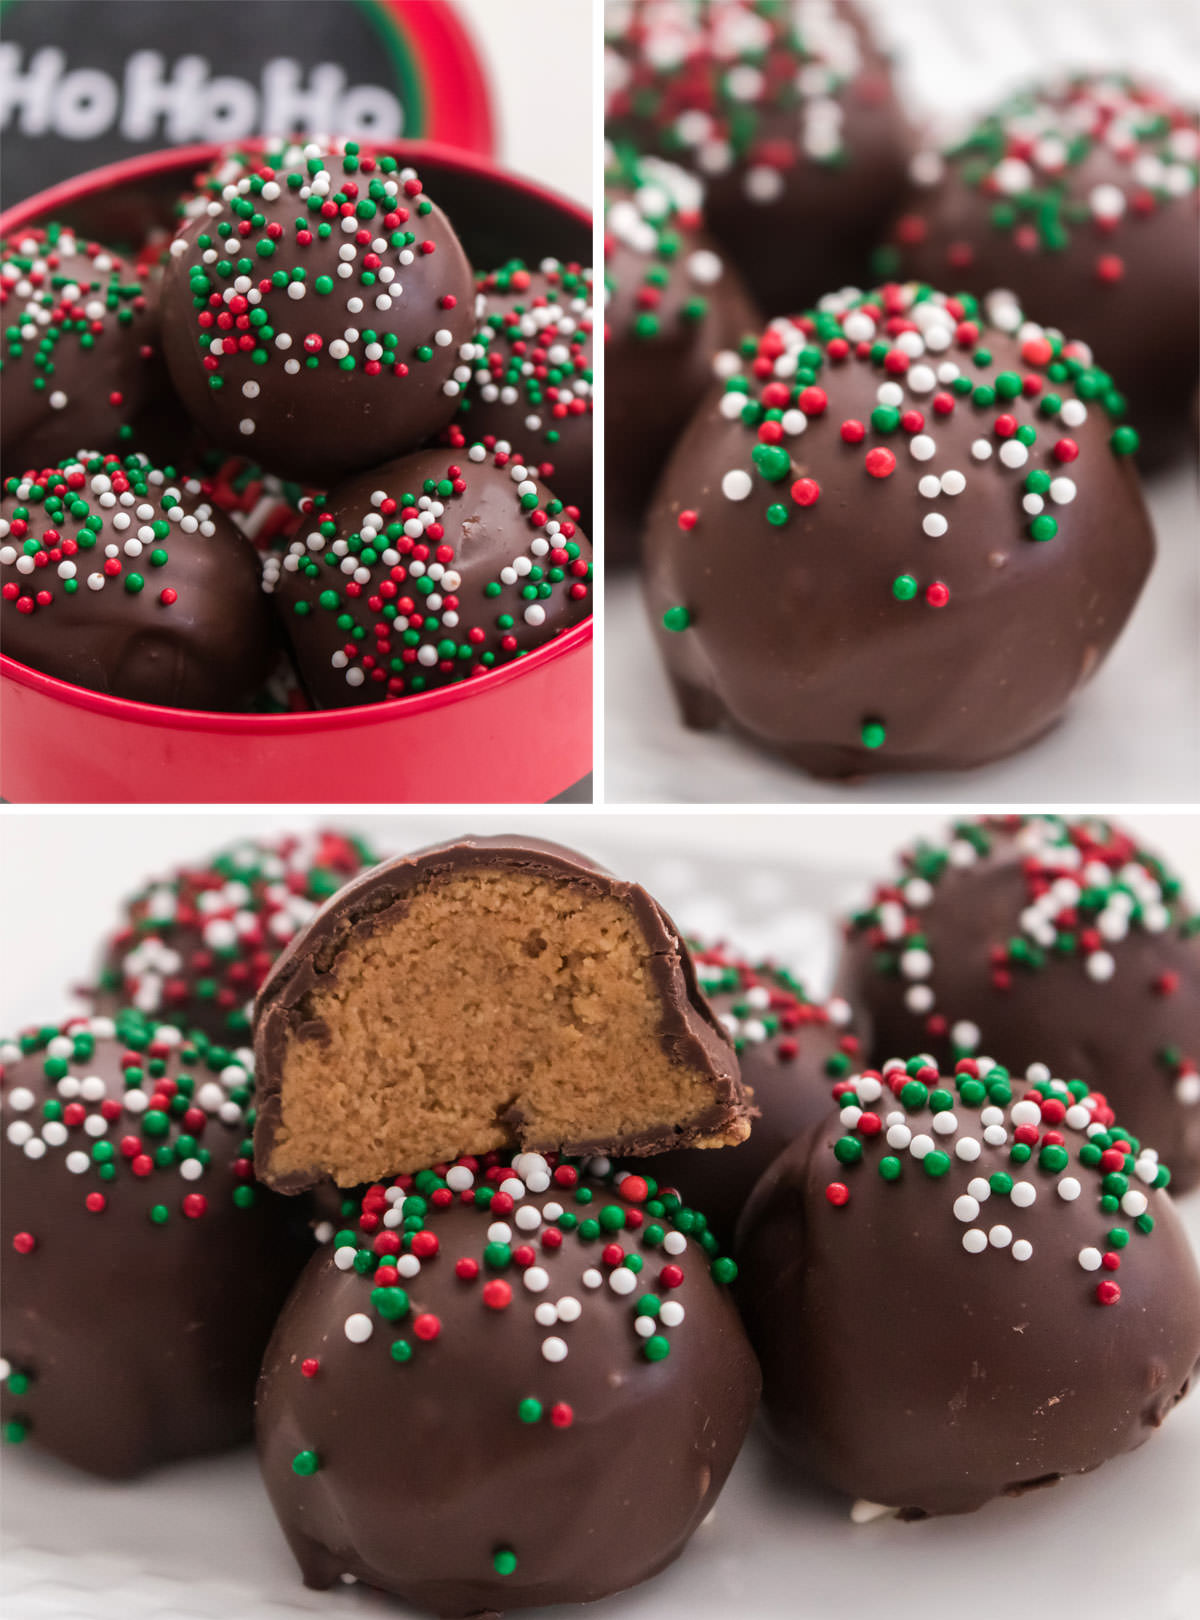 Collage image showing three close up images of a Christmas version of Peanut Butter Balls featuring Christmas sprinkles.